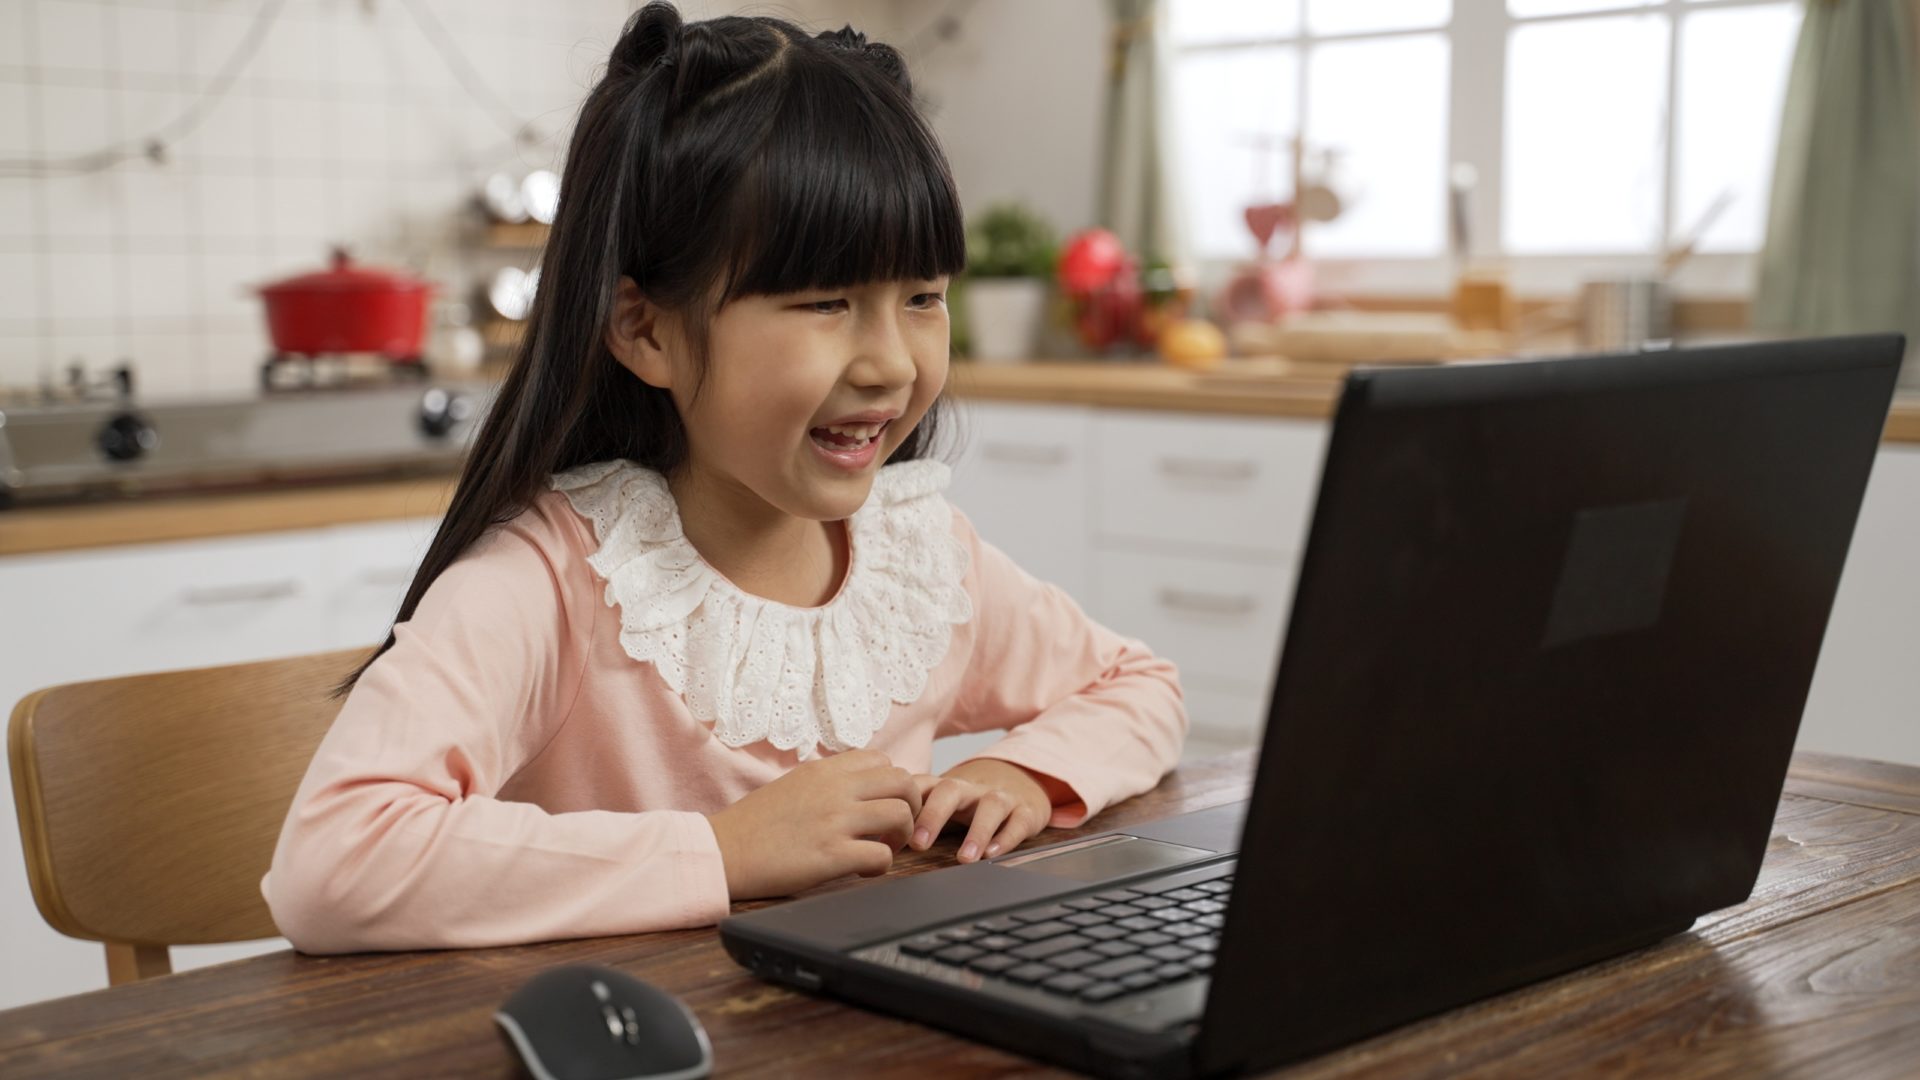 A photo of a girl sitting at a kitchen table, completing a voice-enabled literacy assessment on a laptop computer.